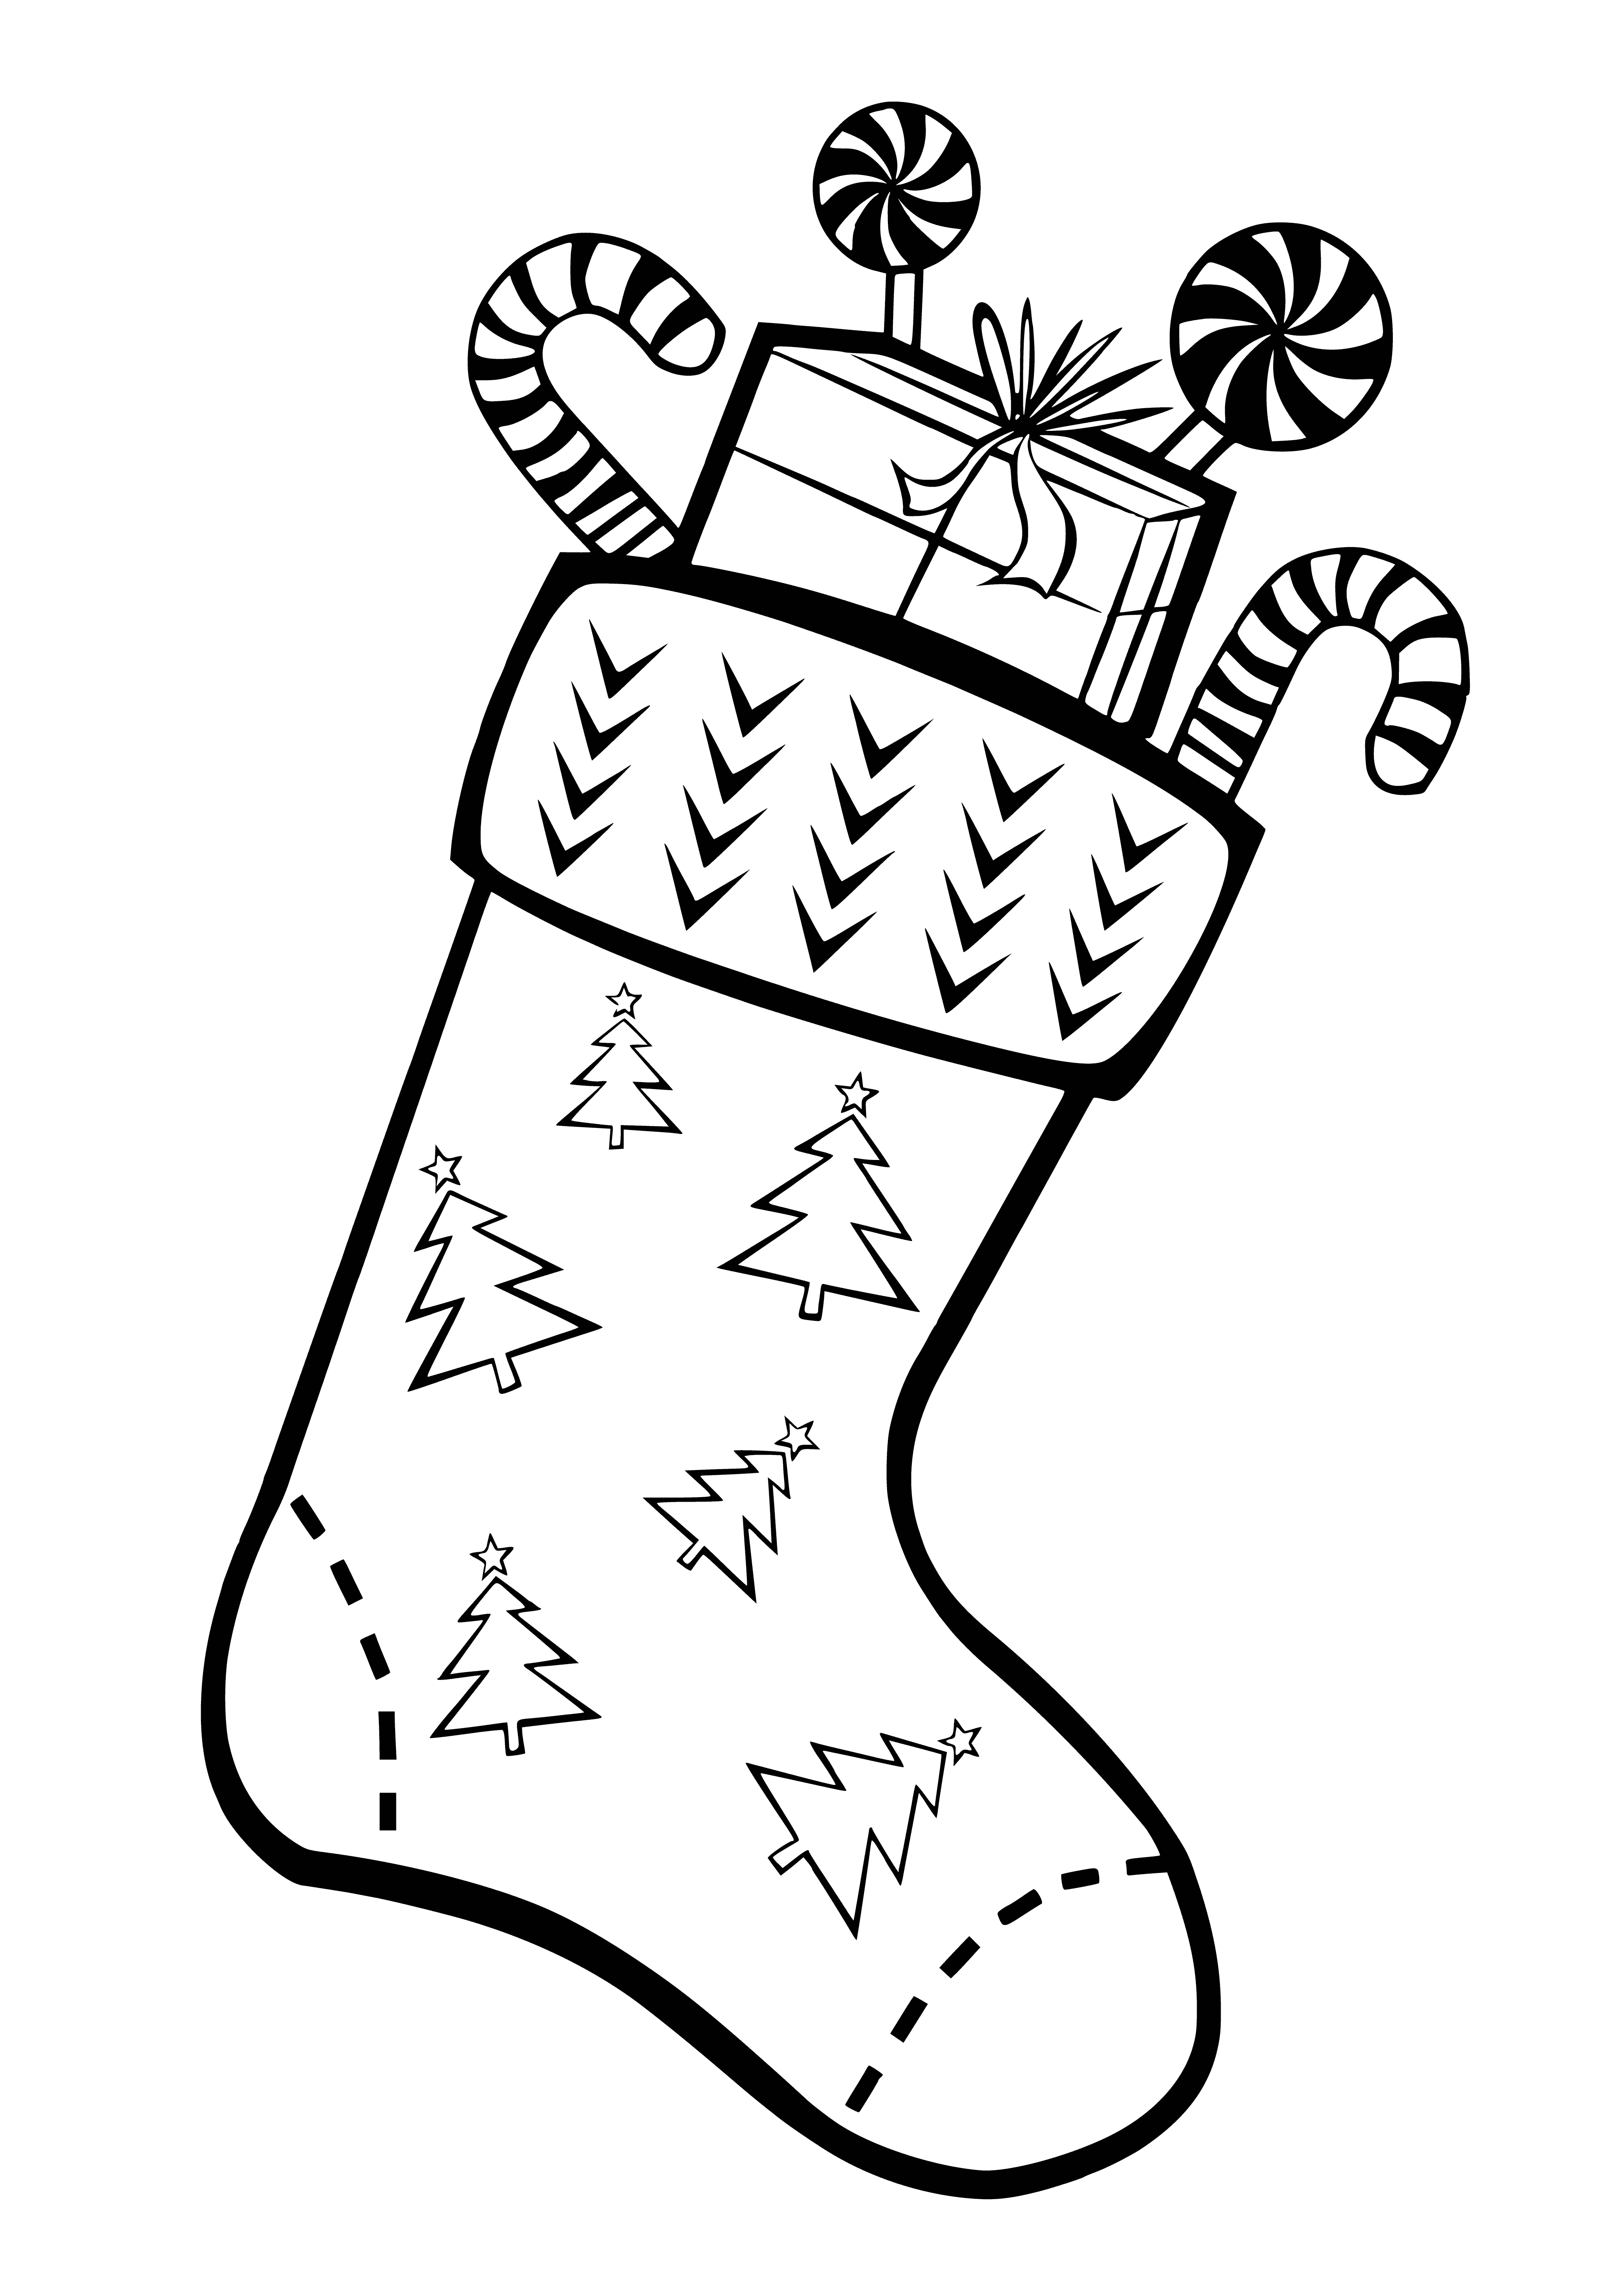 coloring page: Christmas socks: red, green & white w/ small presents & bows - perfect for the holidays! #ChristmasSocks